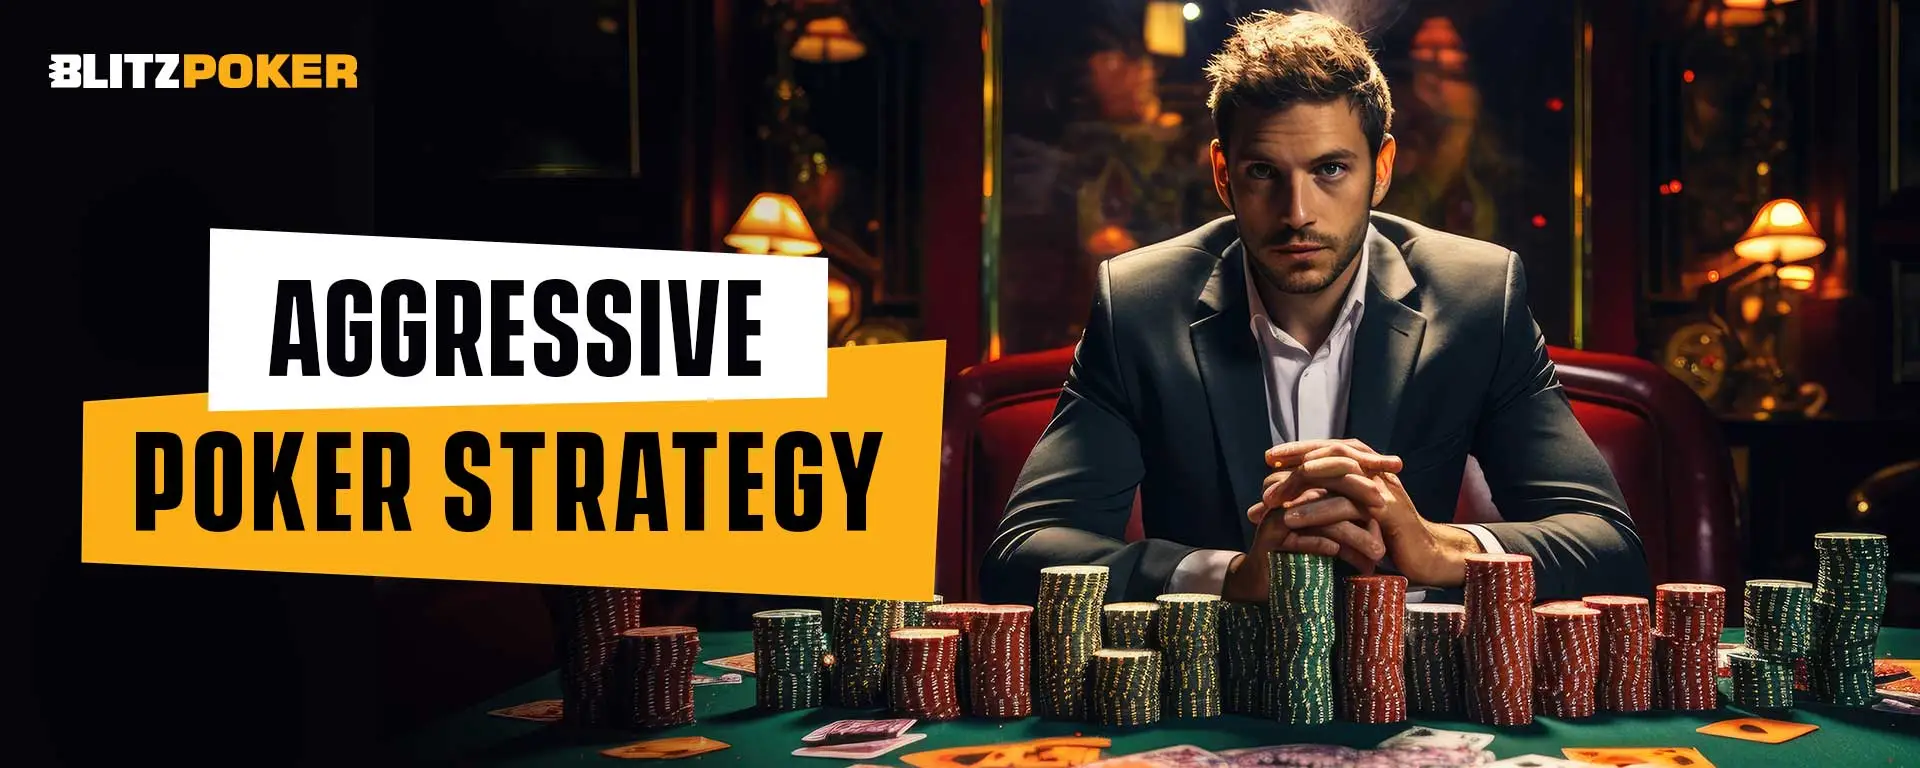 Aggressive Poker Strategy: How To Beat An Aggressive Player & More